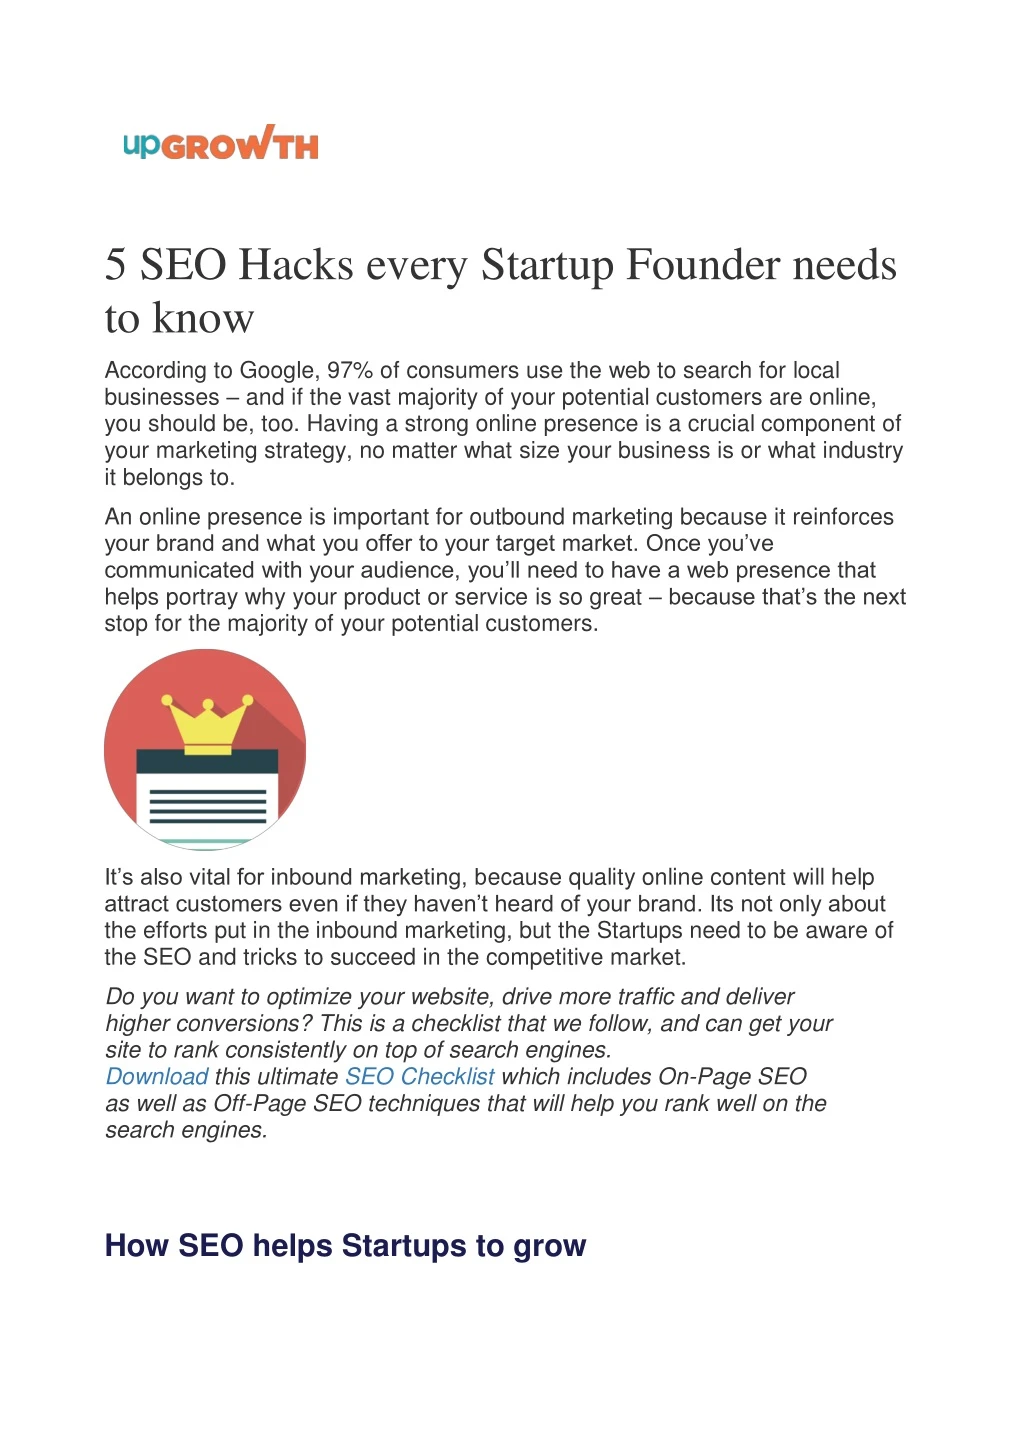 5 seo hacks every startup founder needs to know